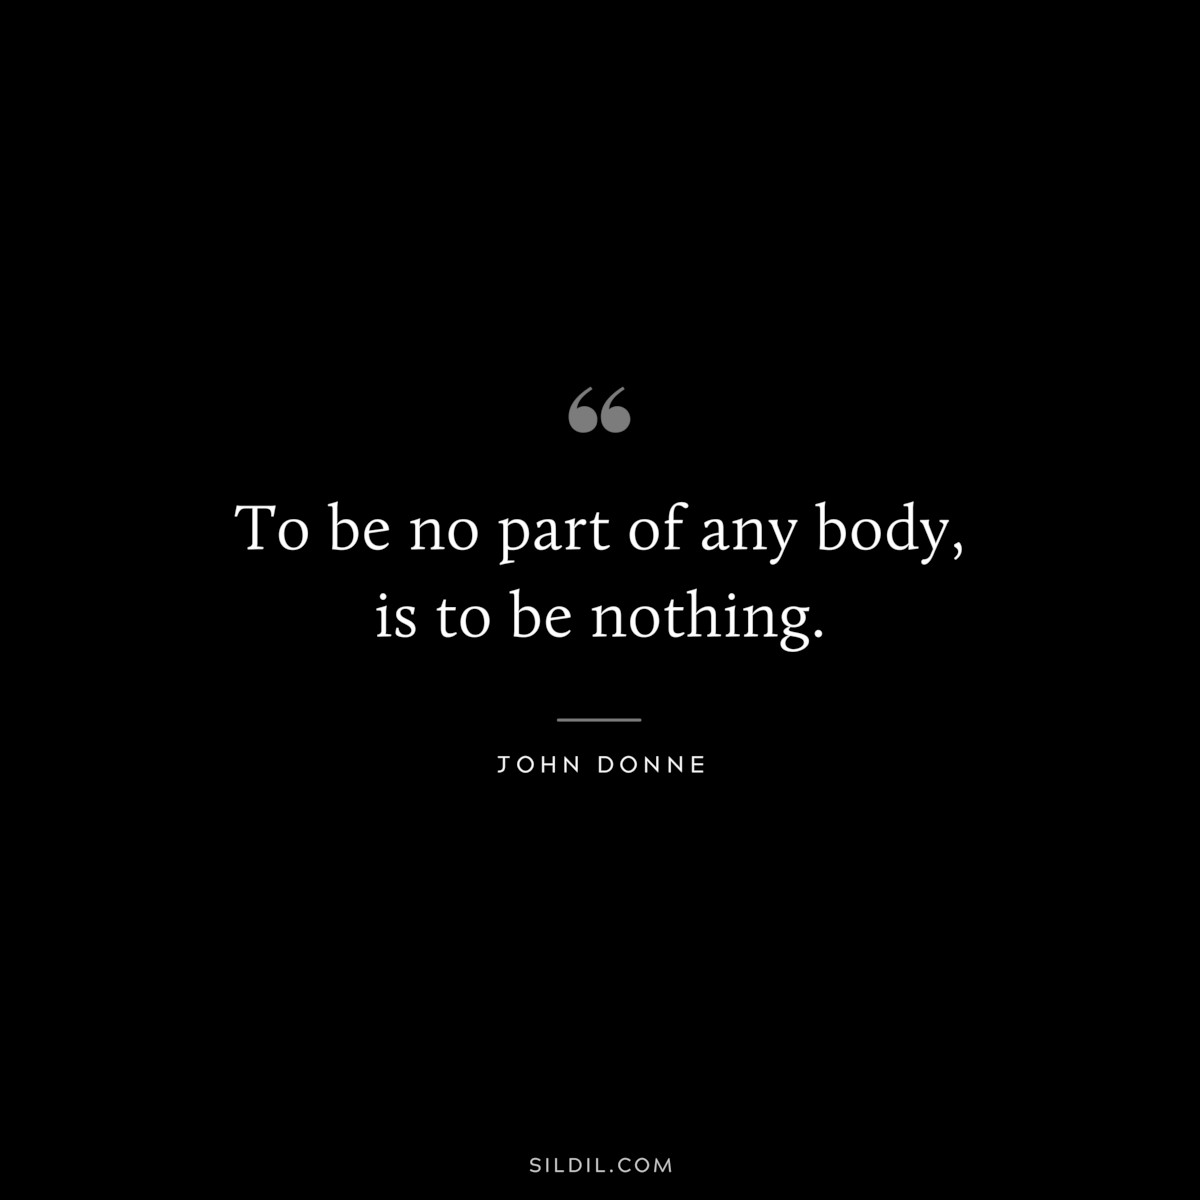 To be no part of any body, is to be nothing. ― John Donne